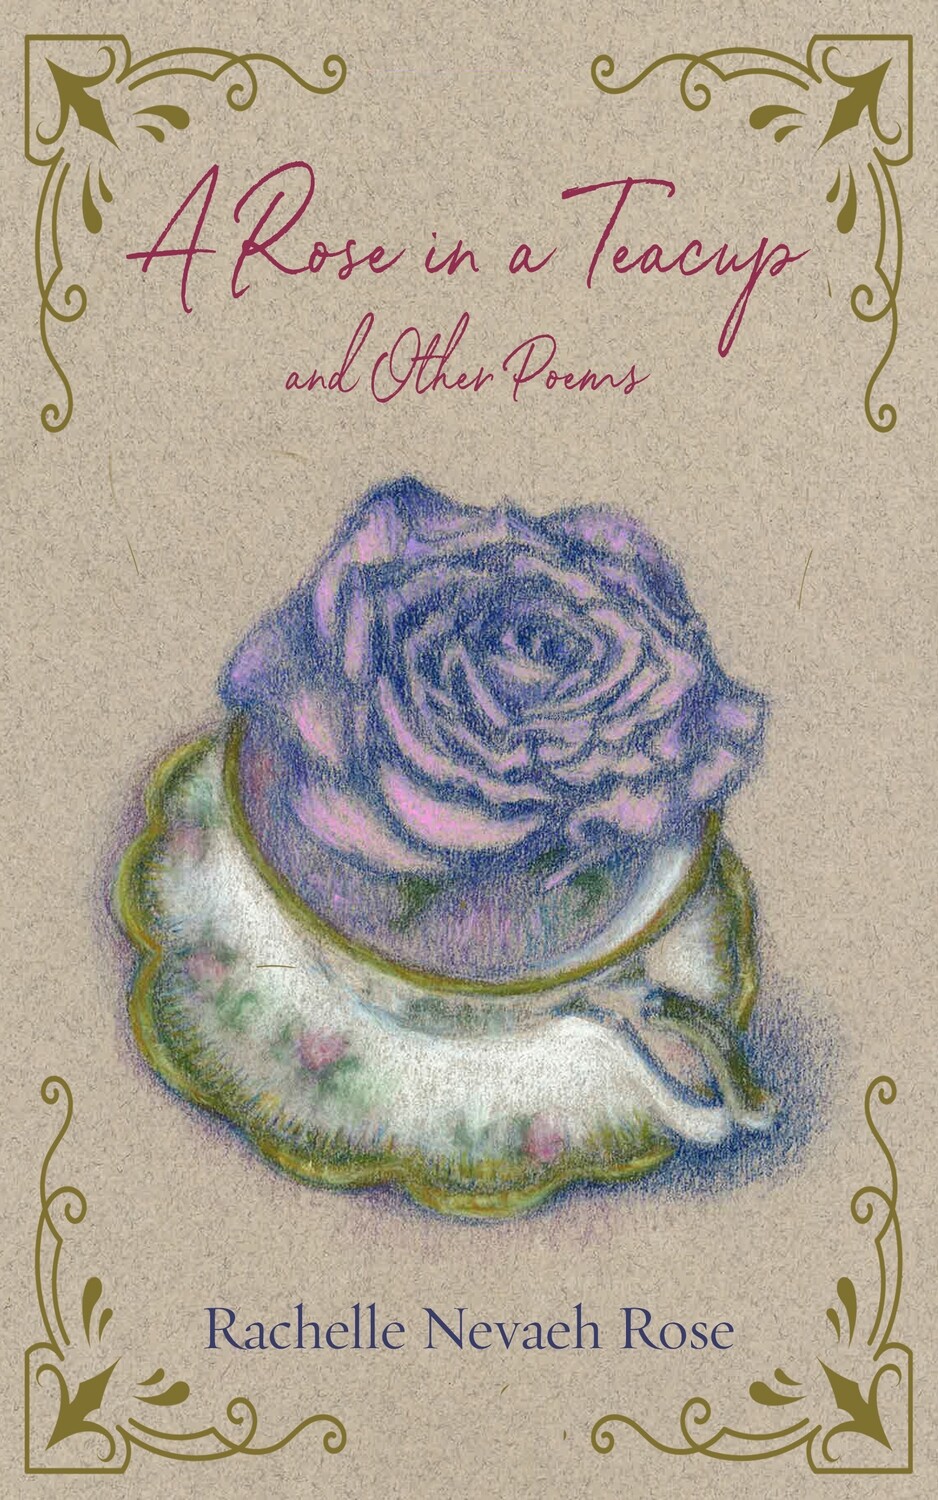 PRE-ORDER: The Rose In a Teacup and Other Poems by Rachelle Nevaeh Rose